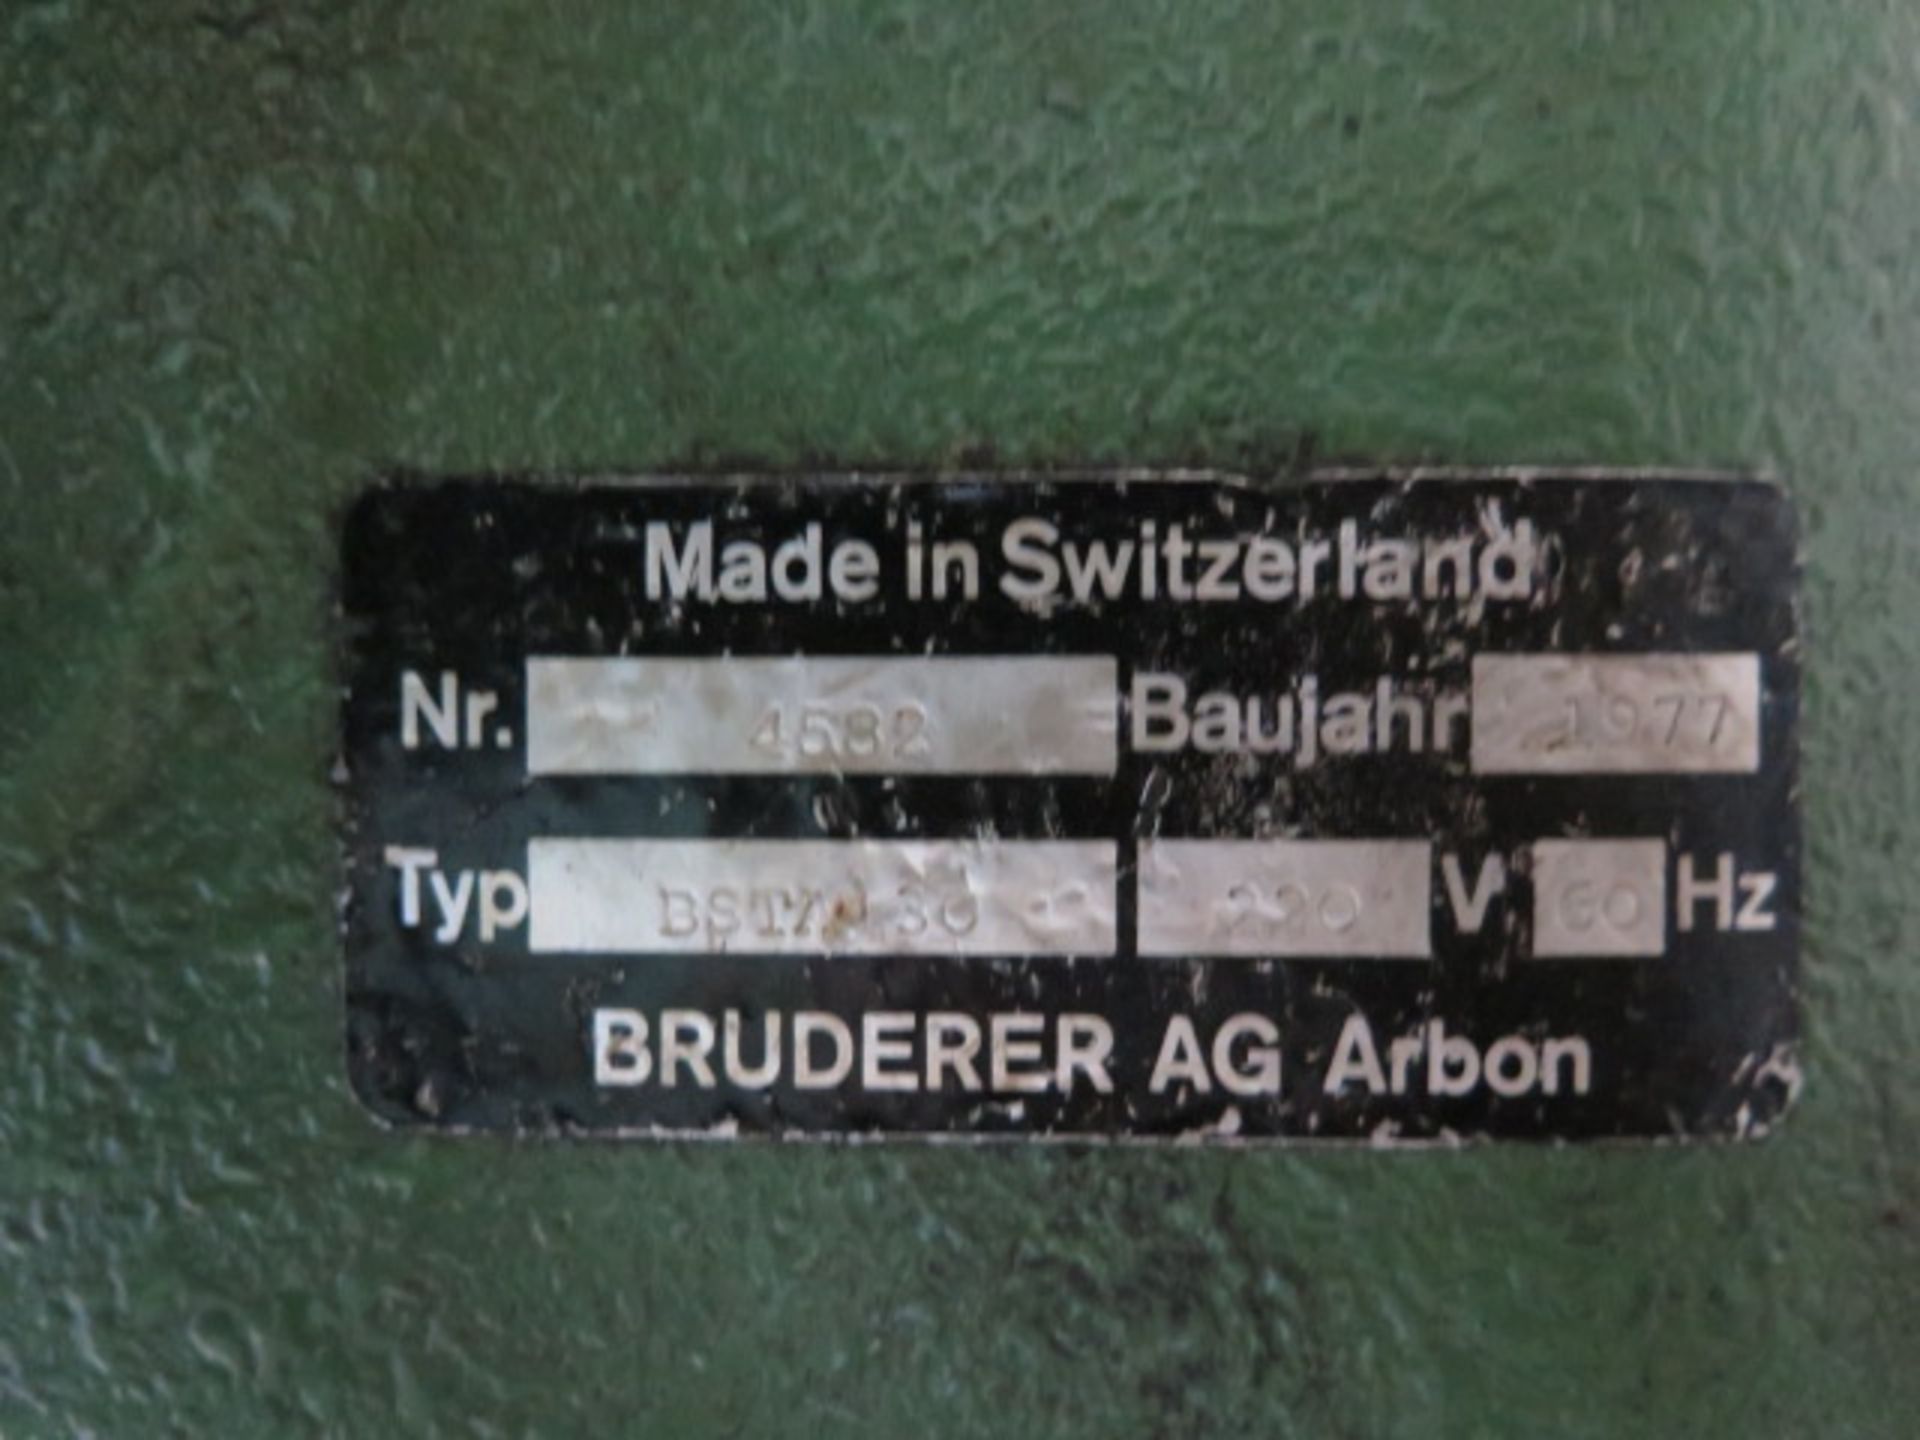 Bruderer BSTA30 33-Ton High Speed Stamping Press w/ Bruderer Controls, SOLD AS IS AND NO WARRANTY - Image 13 of 13